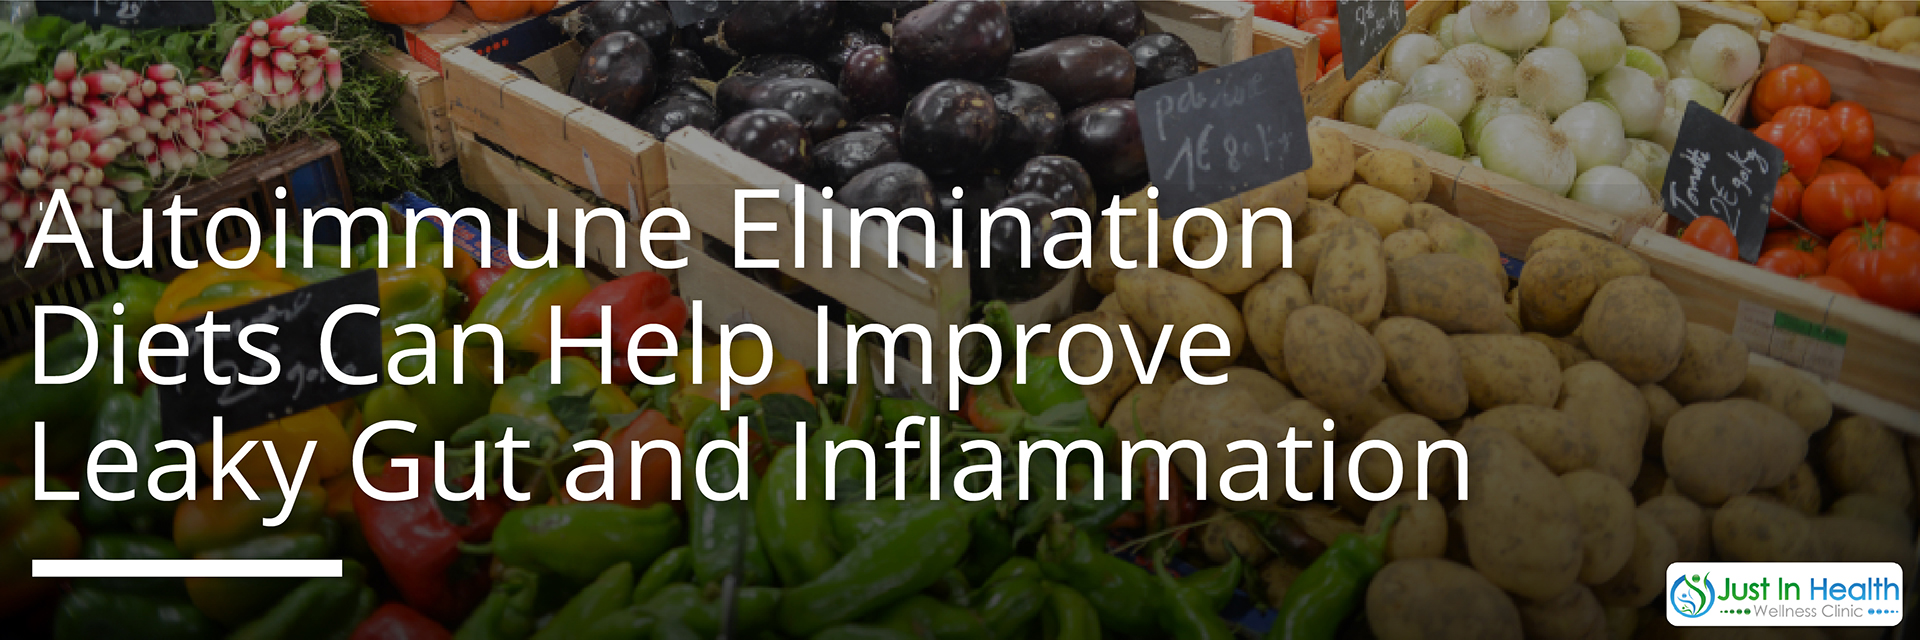 Autoimmune Elimination Diets Can Help Improve Leaky Gut And Inflammation